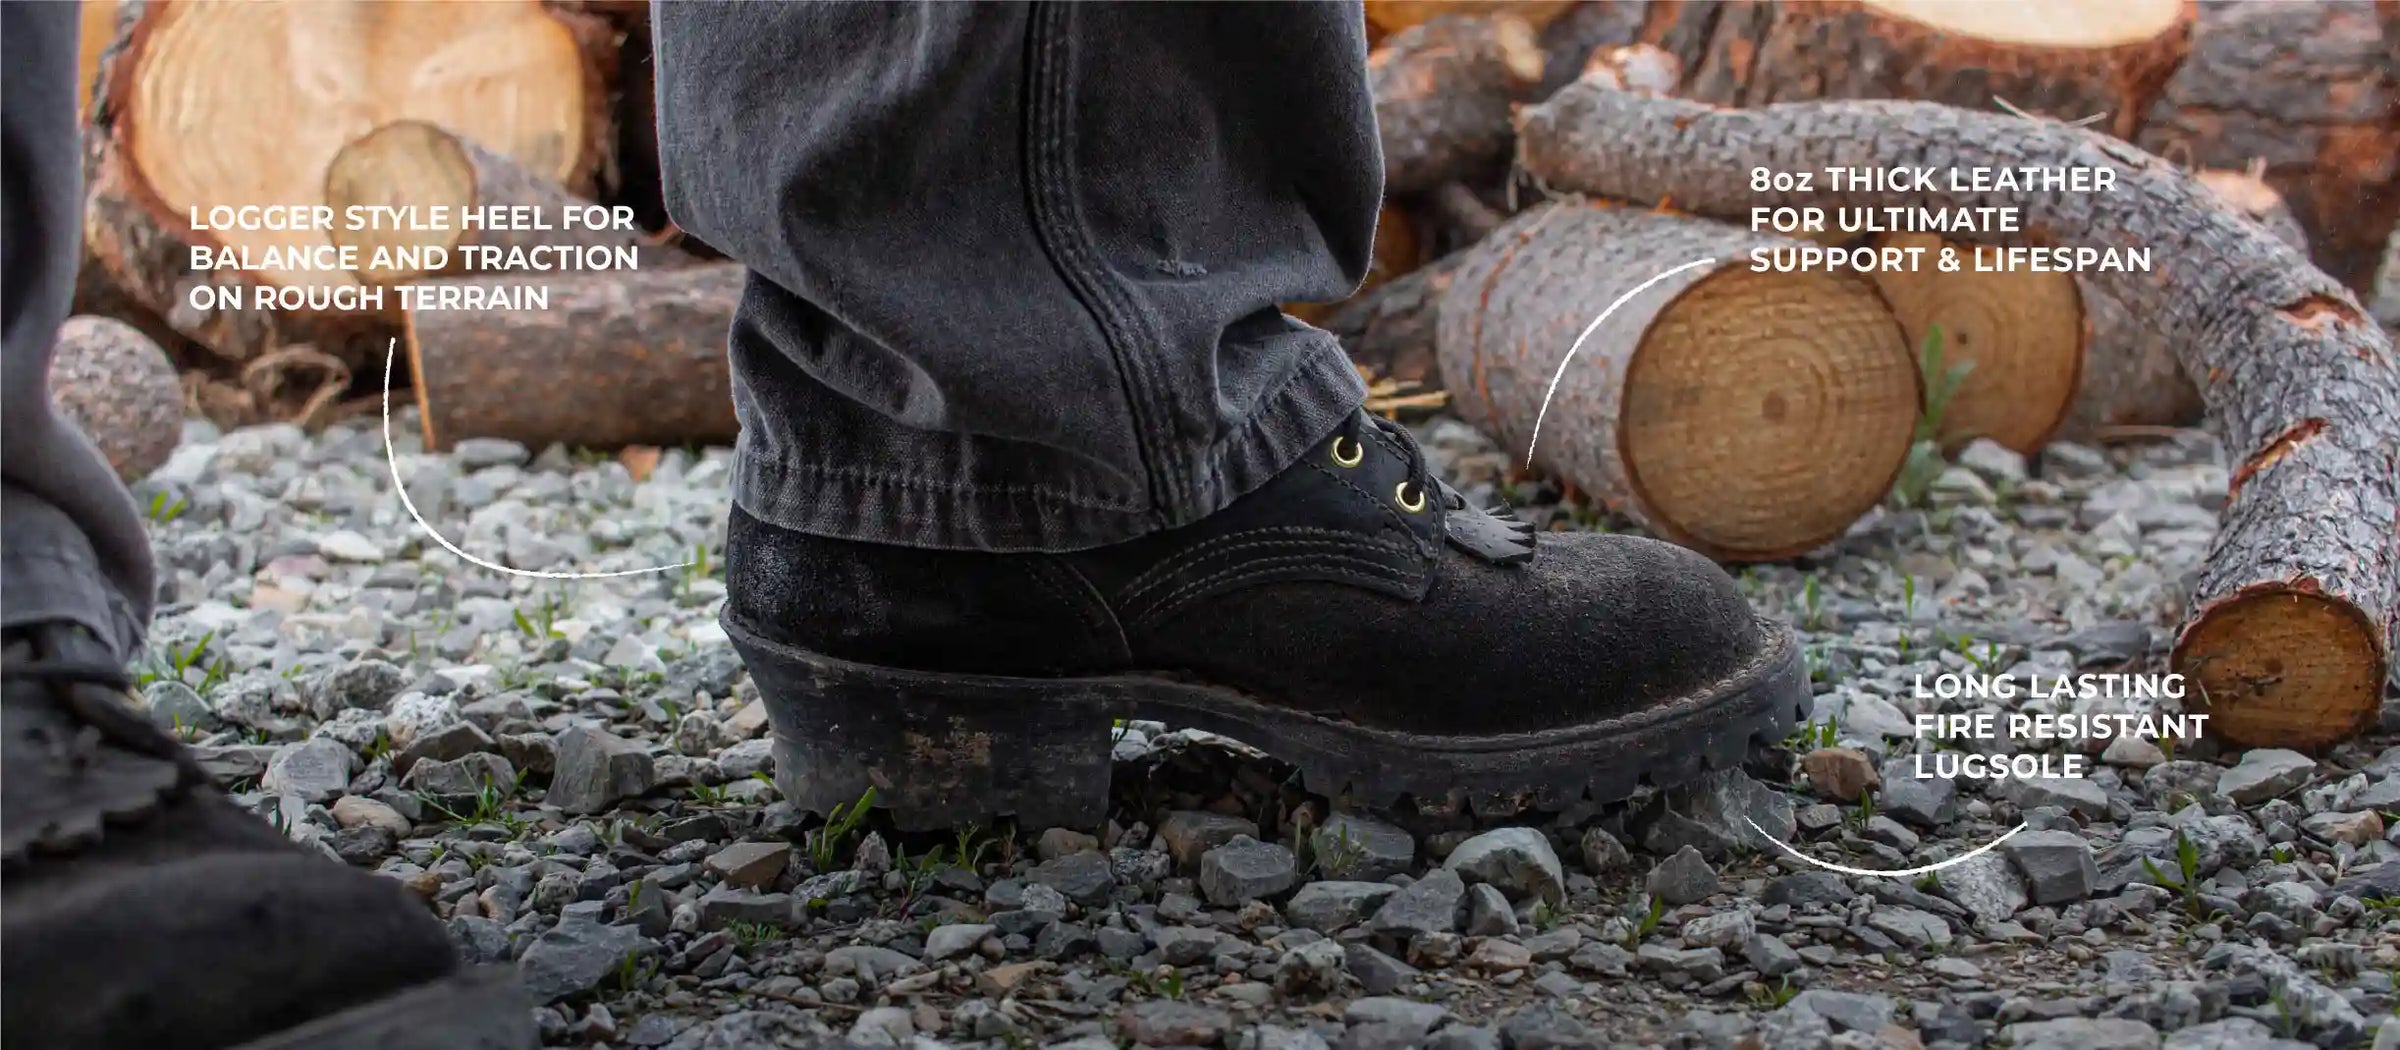 superduty boot model from jk boots standing on gravel